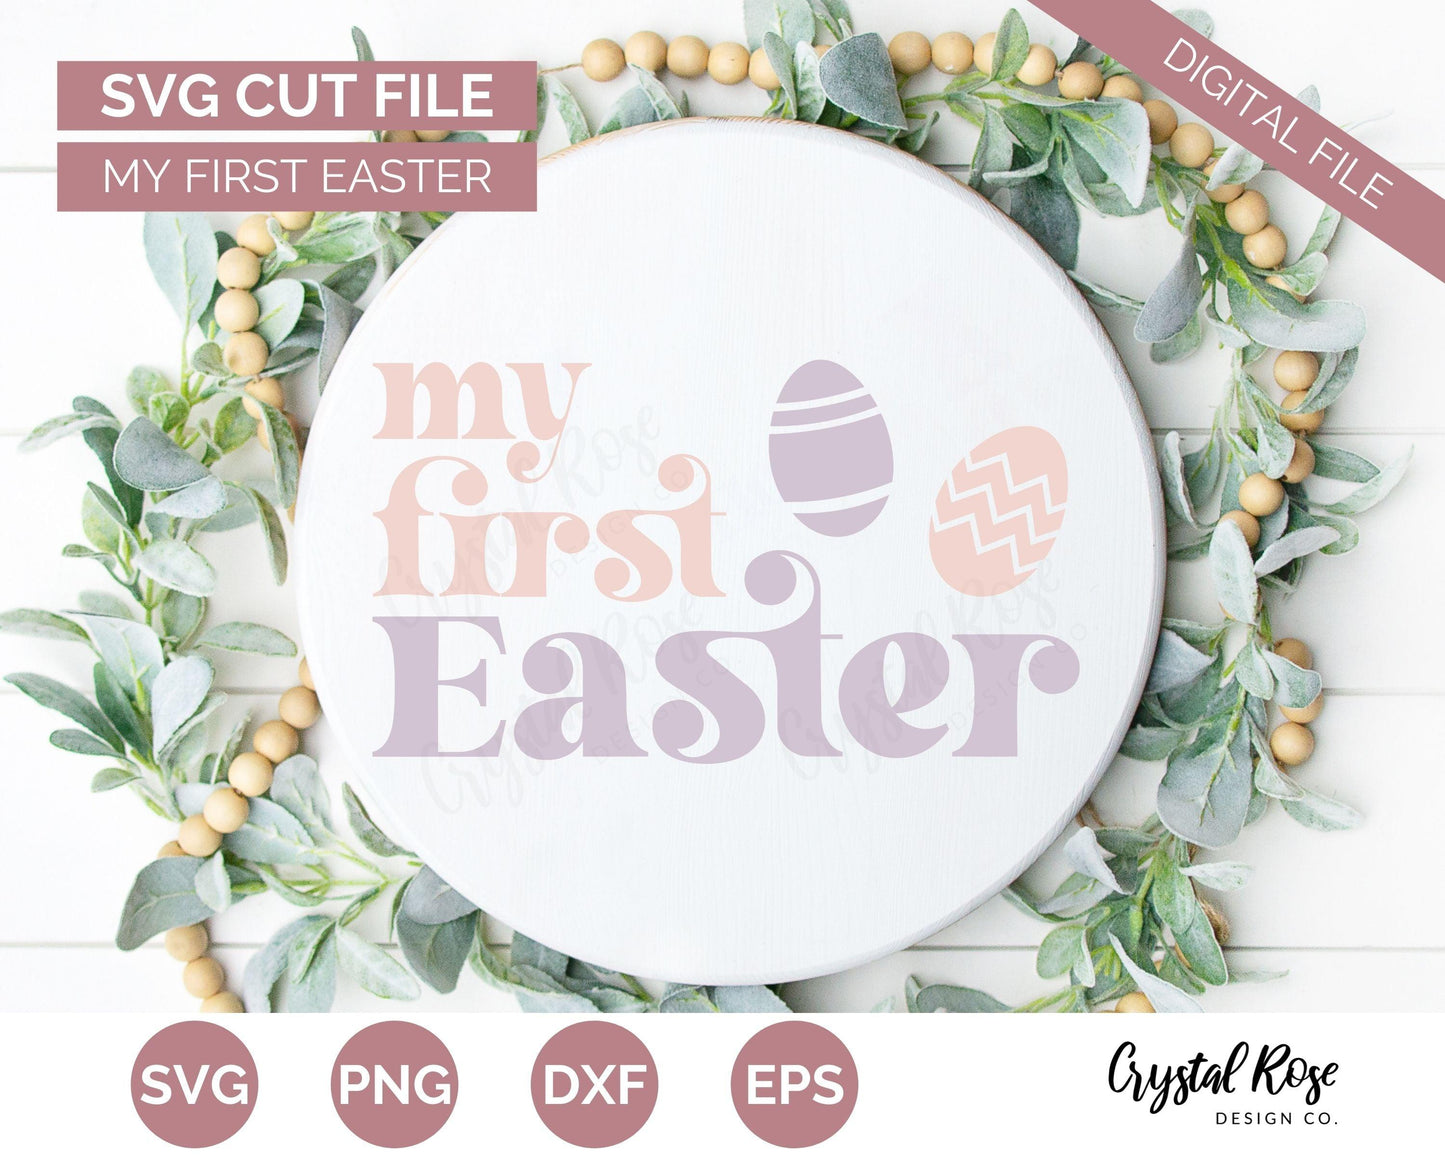 My First Easter SVG, Easter SVG, Digital Download, Cricut, Silhouette, Glowforge (includes svg/png/dxf/eps)